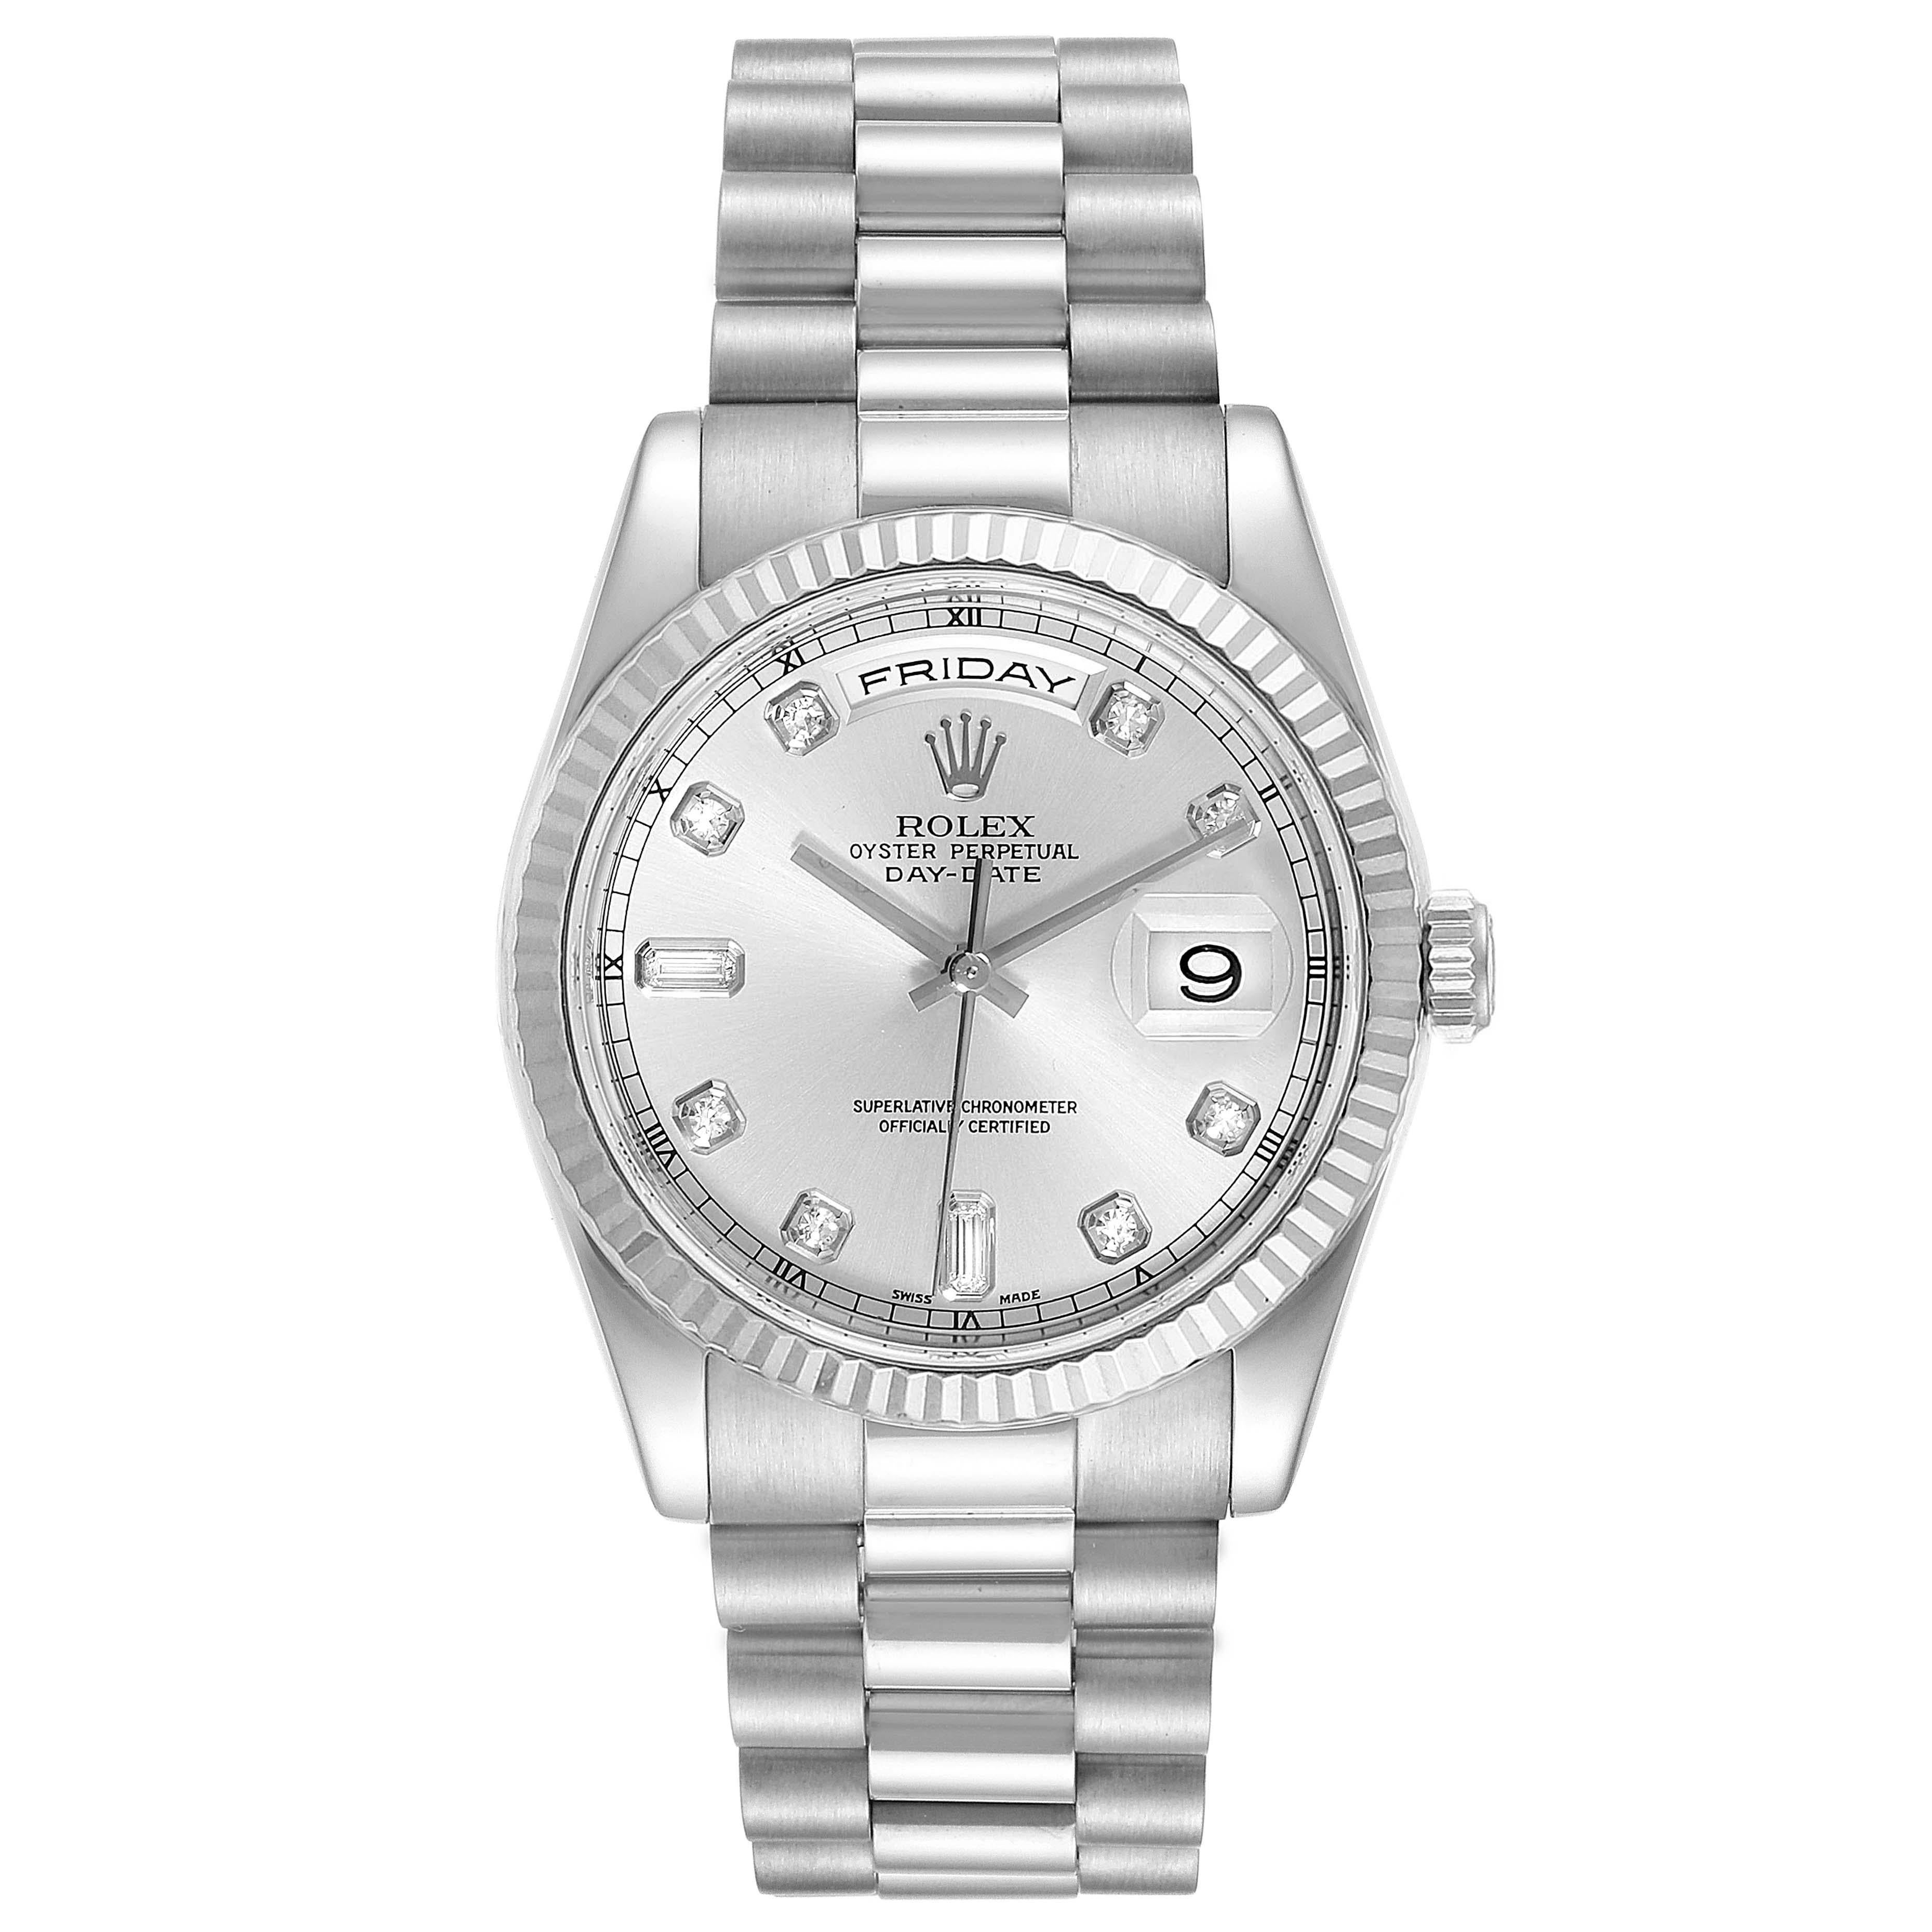 Rolex President Day-Date White Gold Diamond Mens Watch 118239 Box Papers. Officially certified chronometer self-winding movement. 18k white gold oyster case 36.0 mm in diameter. Rolex logo on a crown. 18k white gold fluted bezel. Scratch resistant